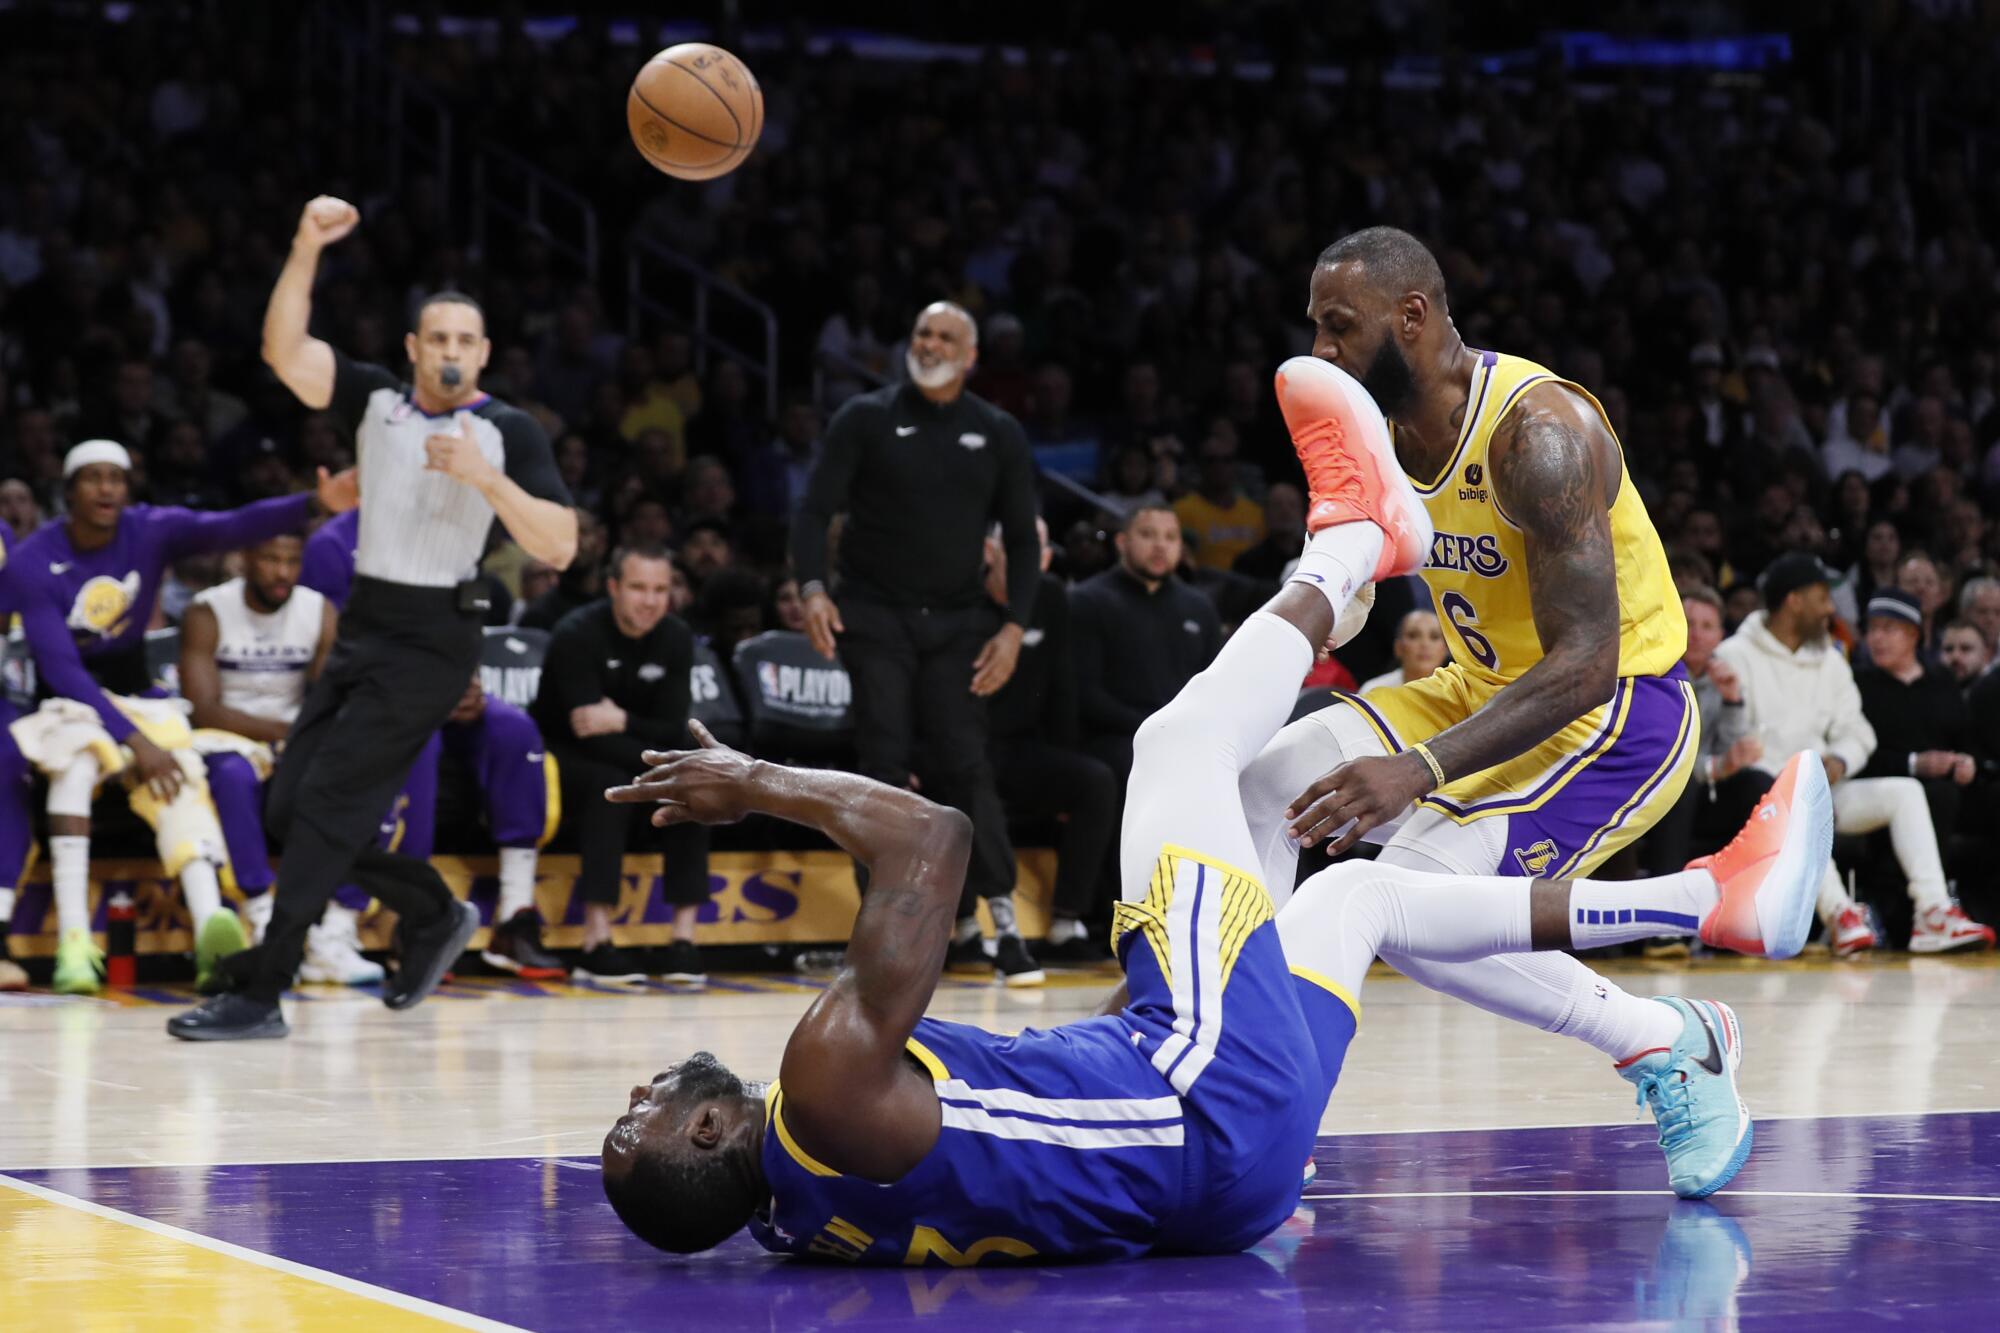 Warriors forward Draymond Green hits his head on the court after being fouled by Lakers star LeBron James.